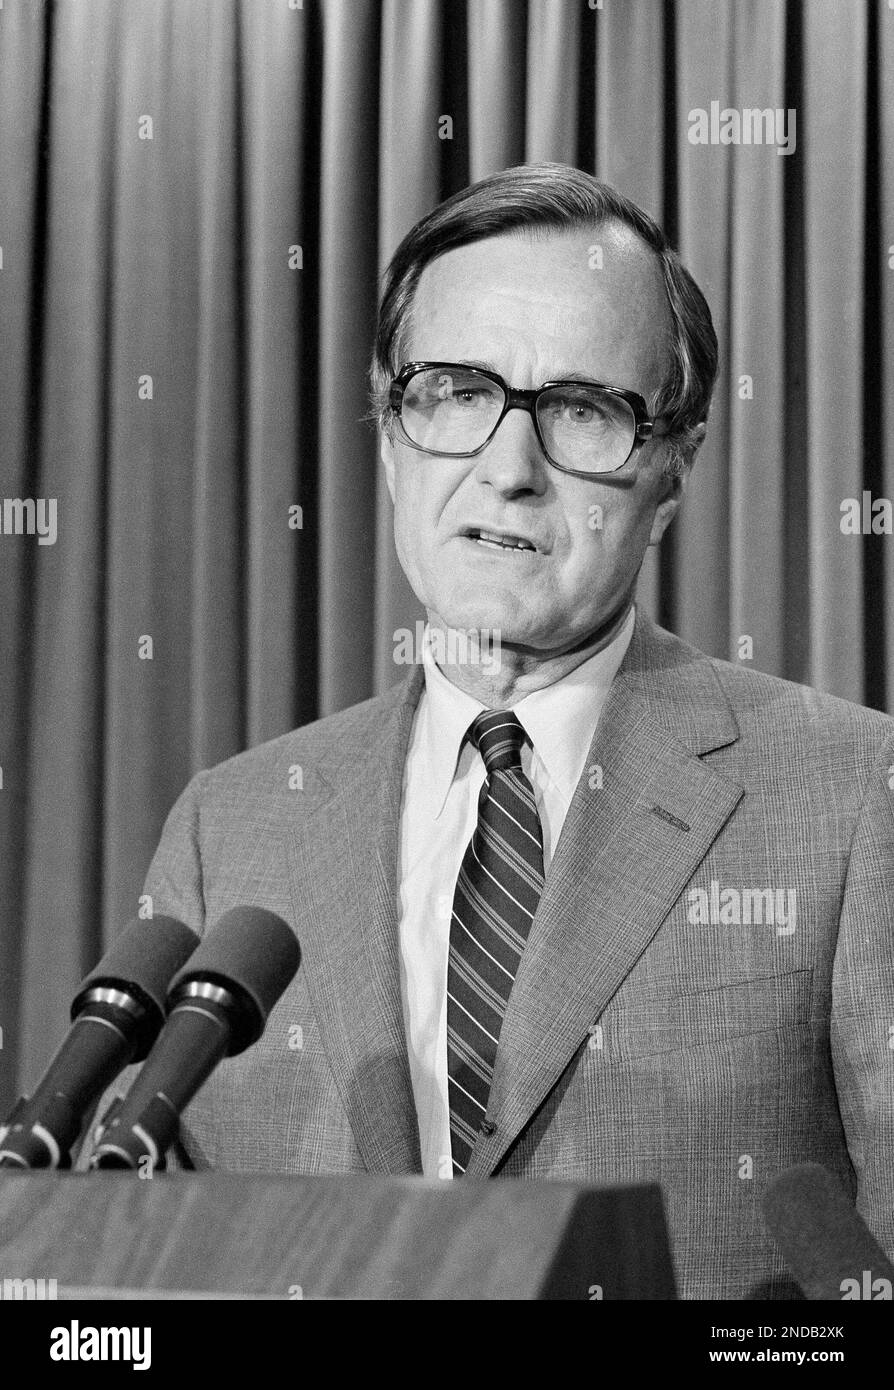 vice-president-george-hw-bush-appears-in-the-white-house-press-room-in-washington-on-march-30-1981-after-returning-abruptly-from-a-trip-to-texas-after-learning-of-the-shooting-of-president-ronald-reagan-ap-photoron-edmonds-2NDB2XK.jpg